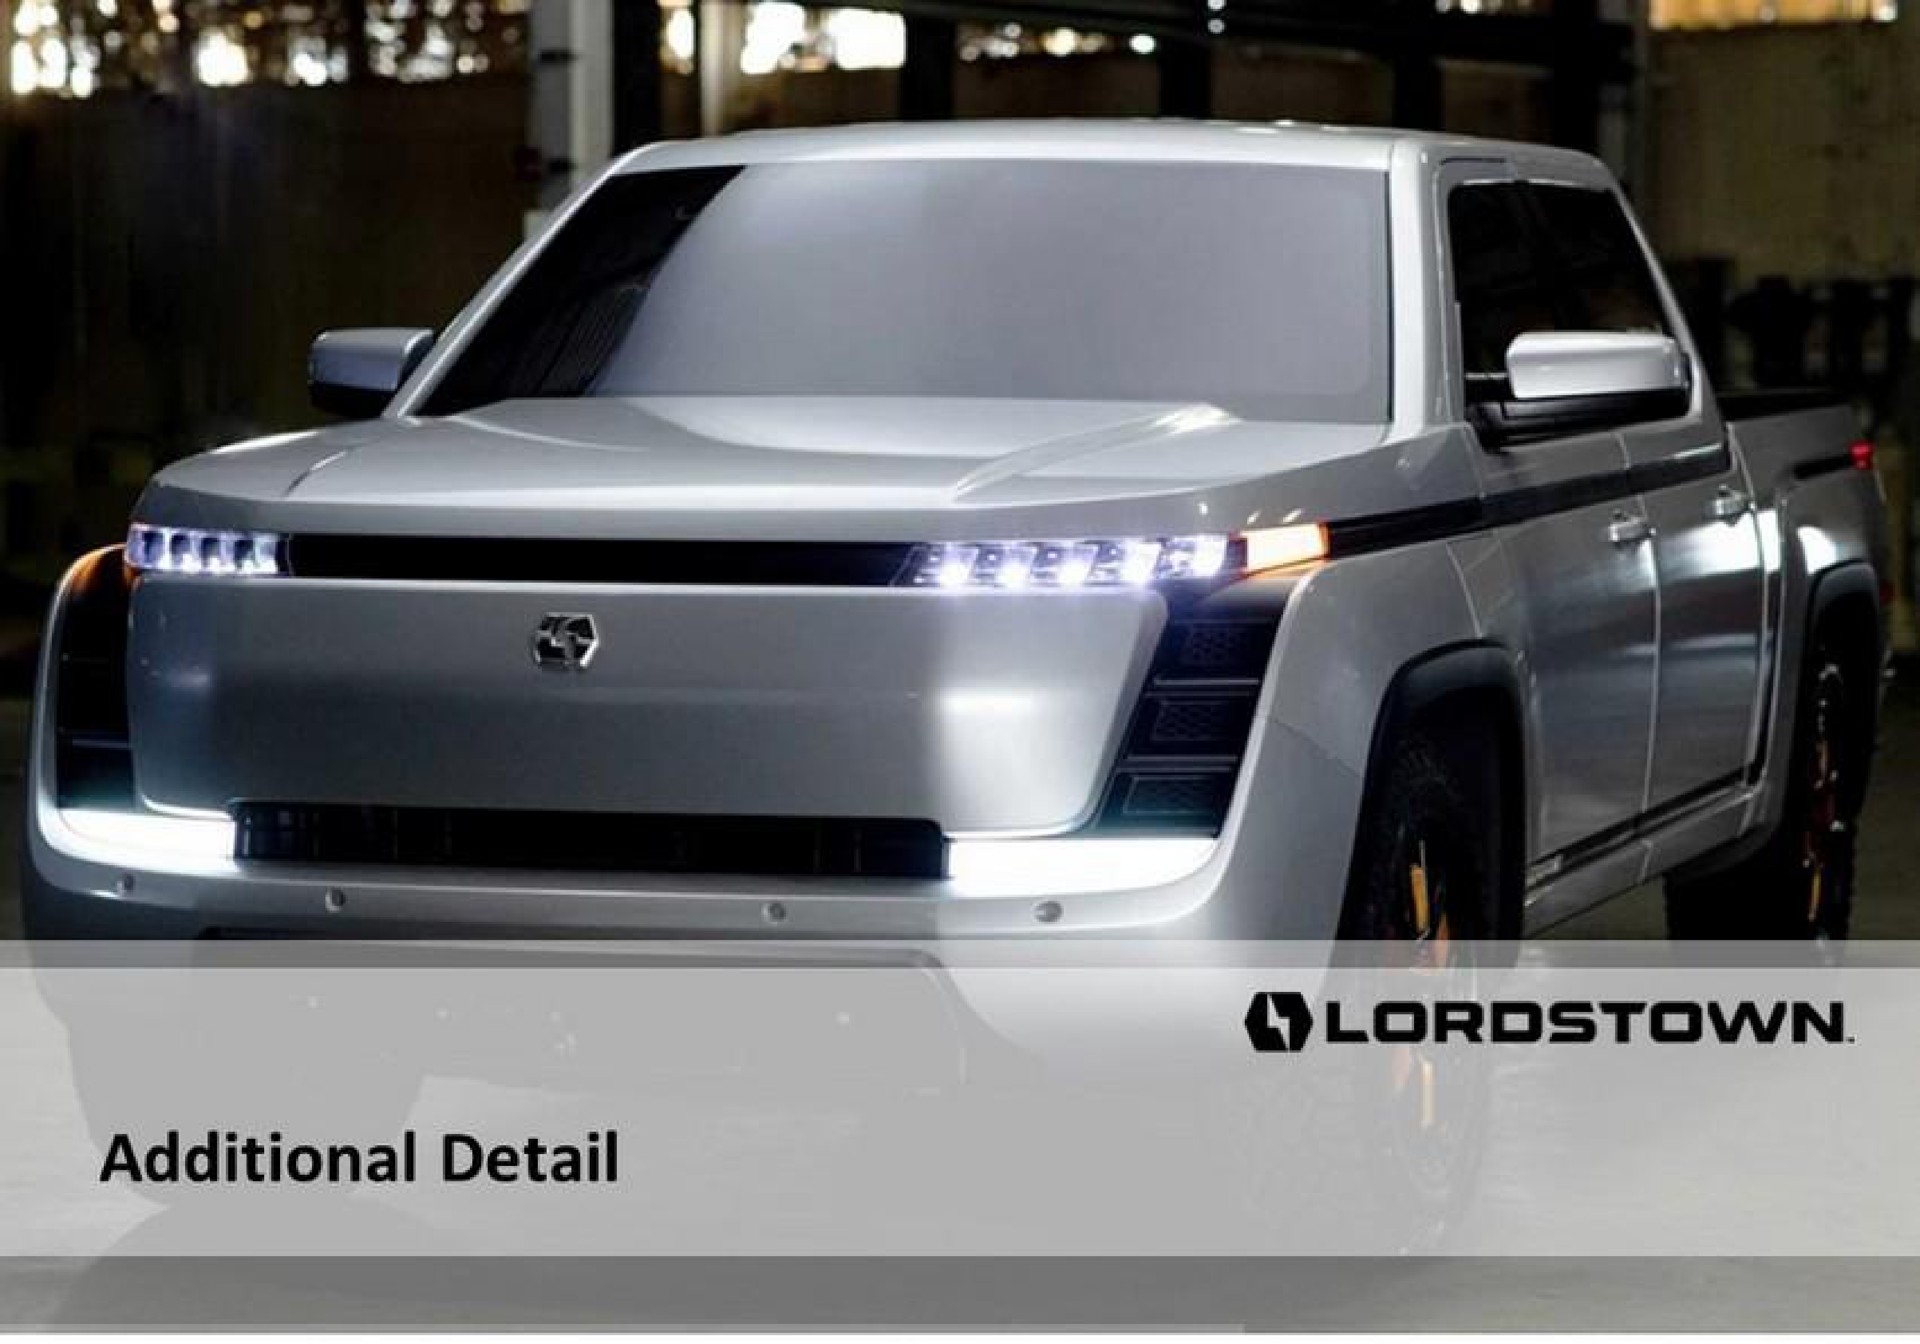 additional detail | Lordstown Motors